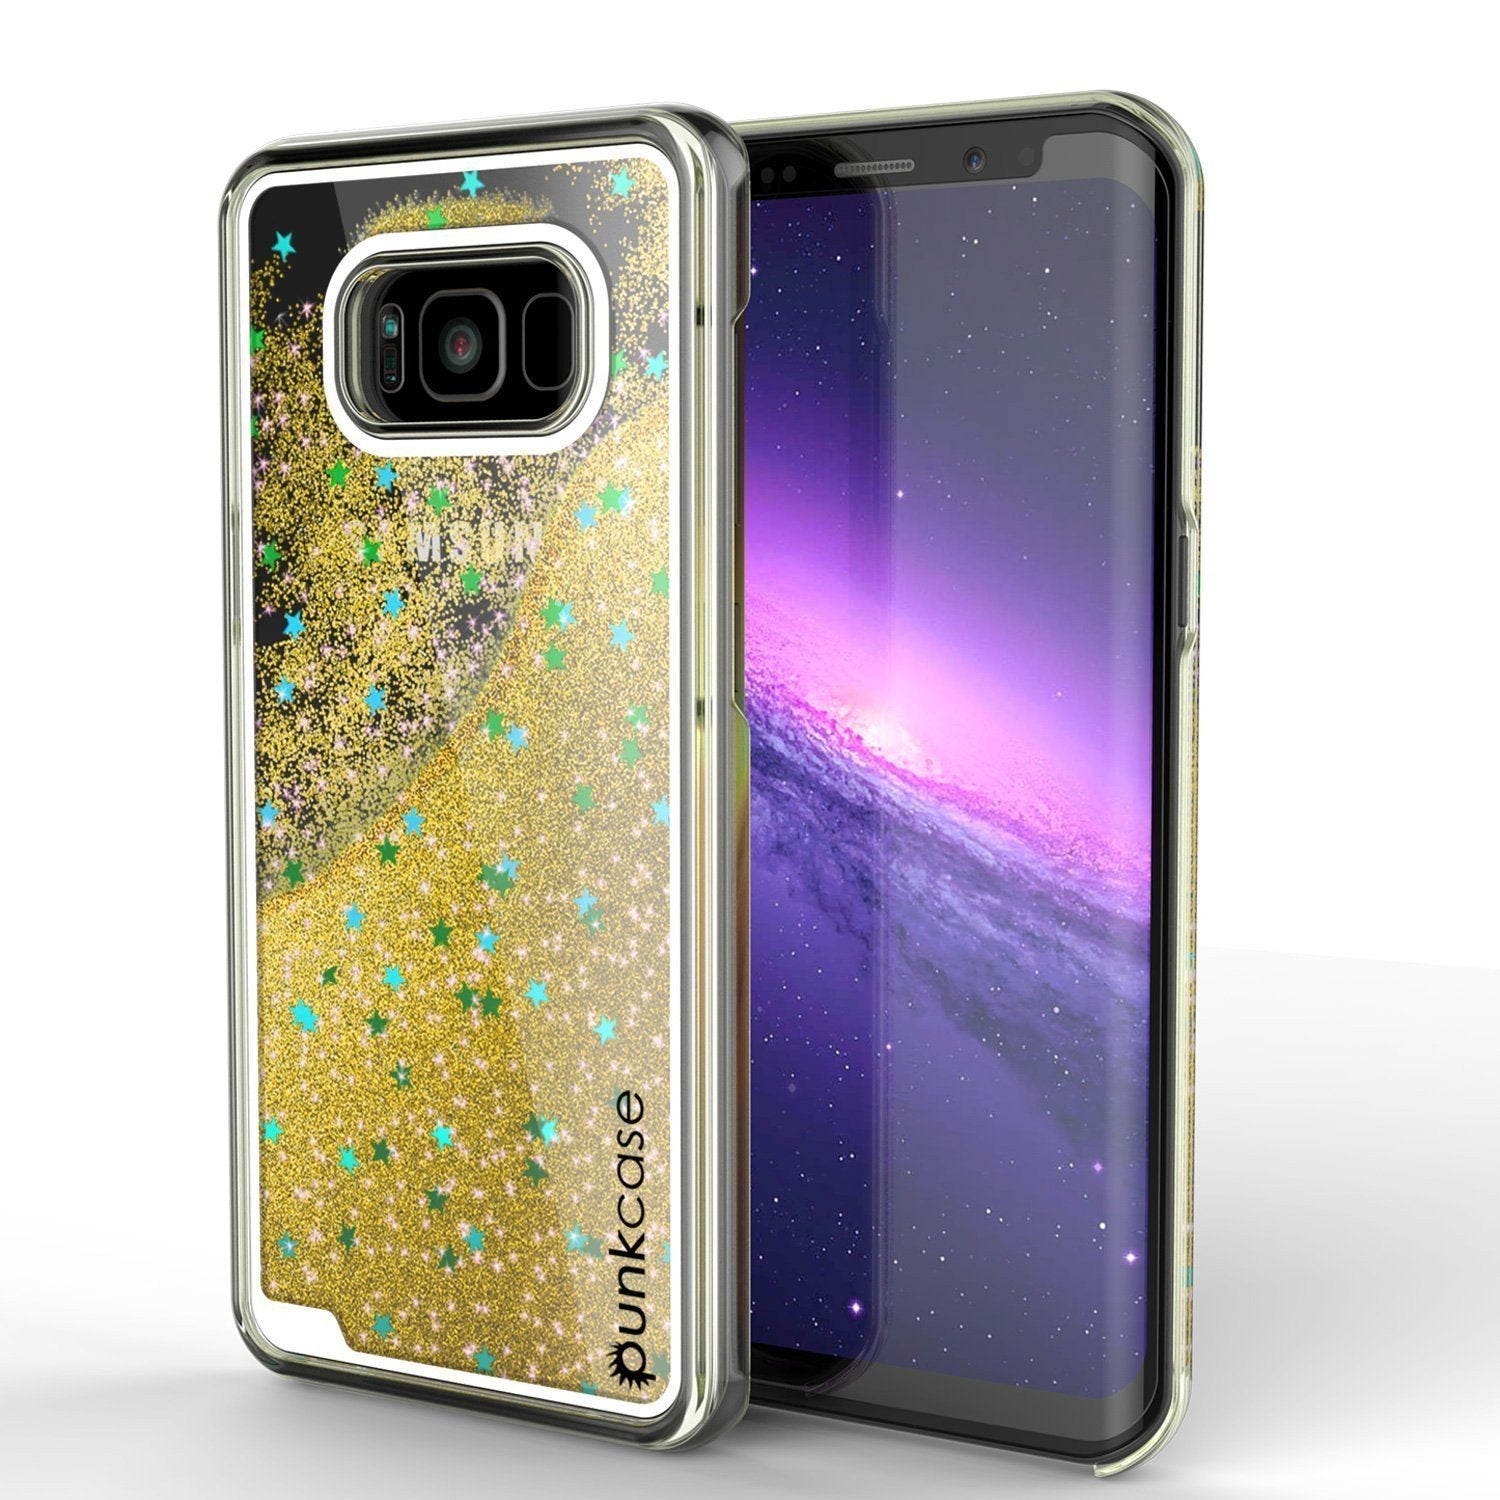 S8 Plus Case, Punkcase [Liquid Series] Protective Dual Layer Floating Glitter Cover with lots of Bling & Sparkle + PunkShield Screen Protector for Samsungs Galaxy S8+ [Gold]